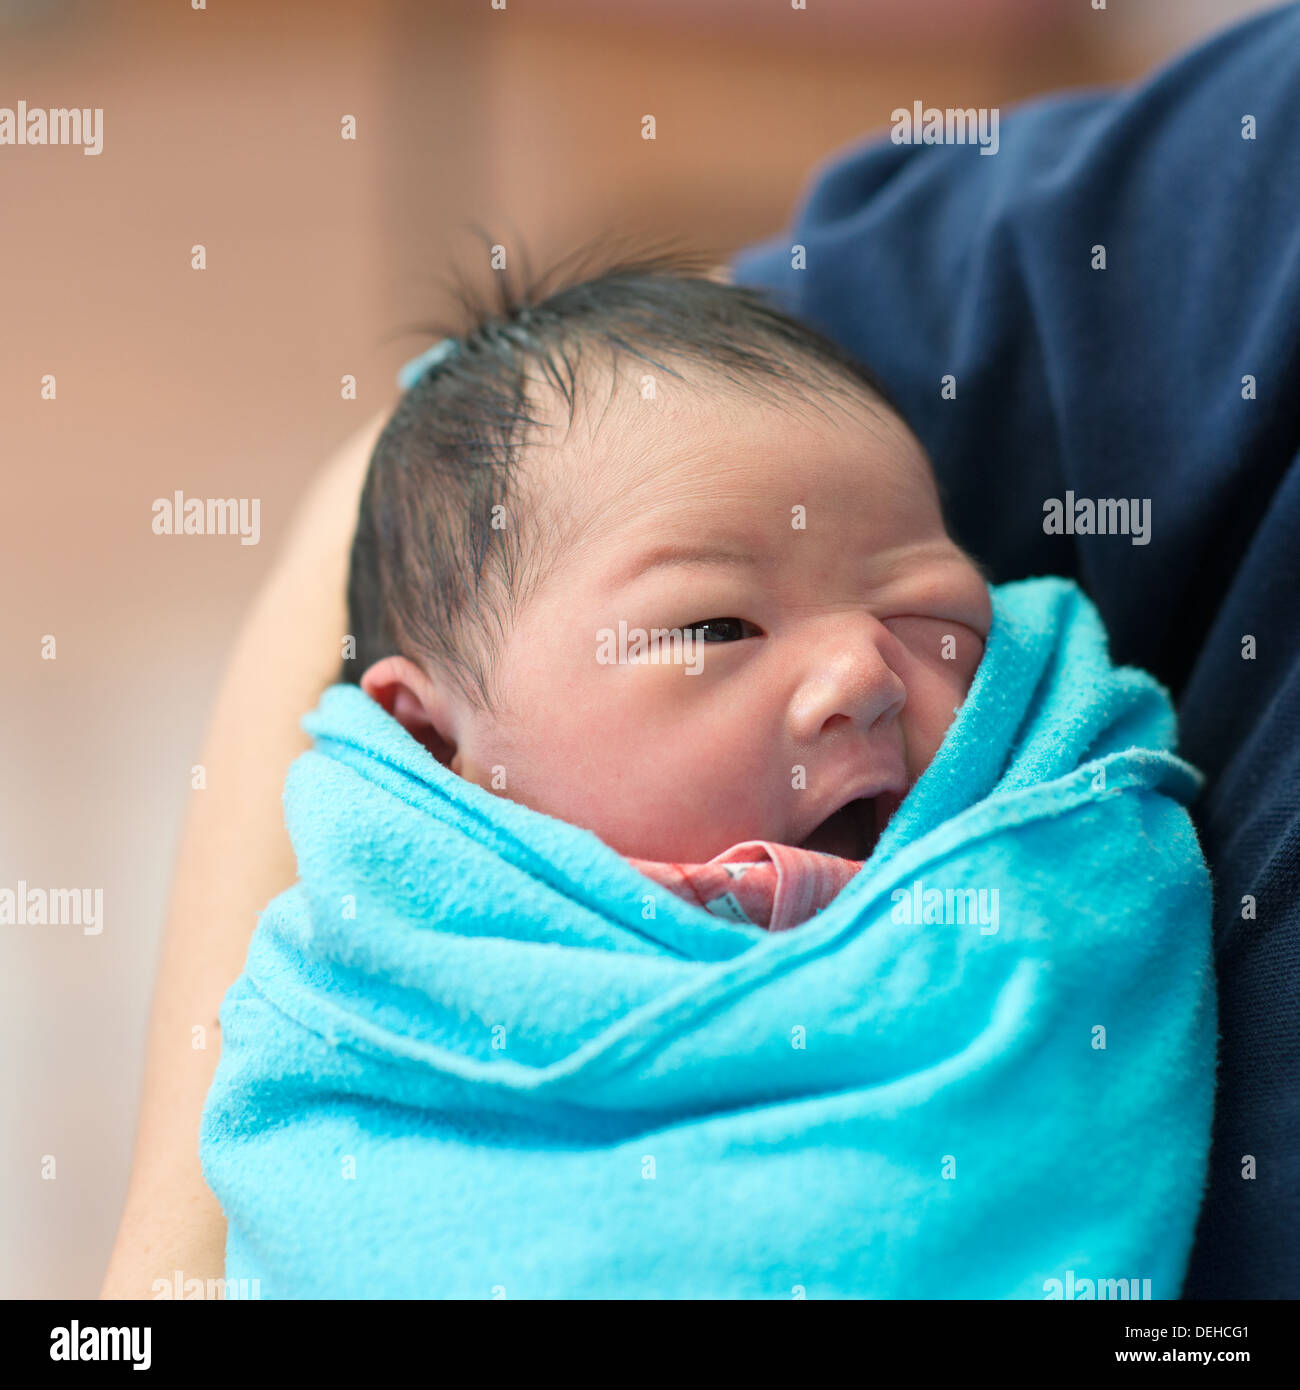 Newborn Asian baby girl smiling in father's arms, inside hospital room Stock Photo